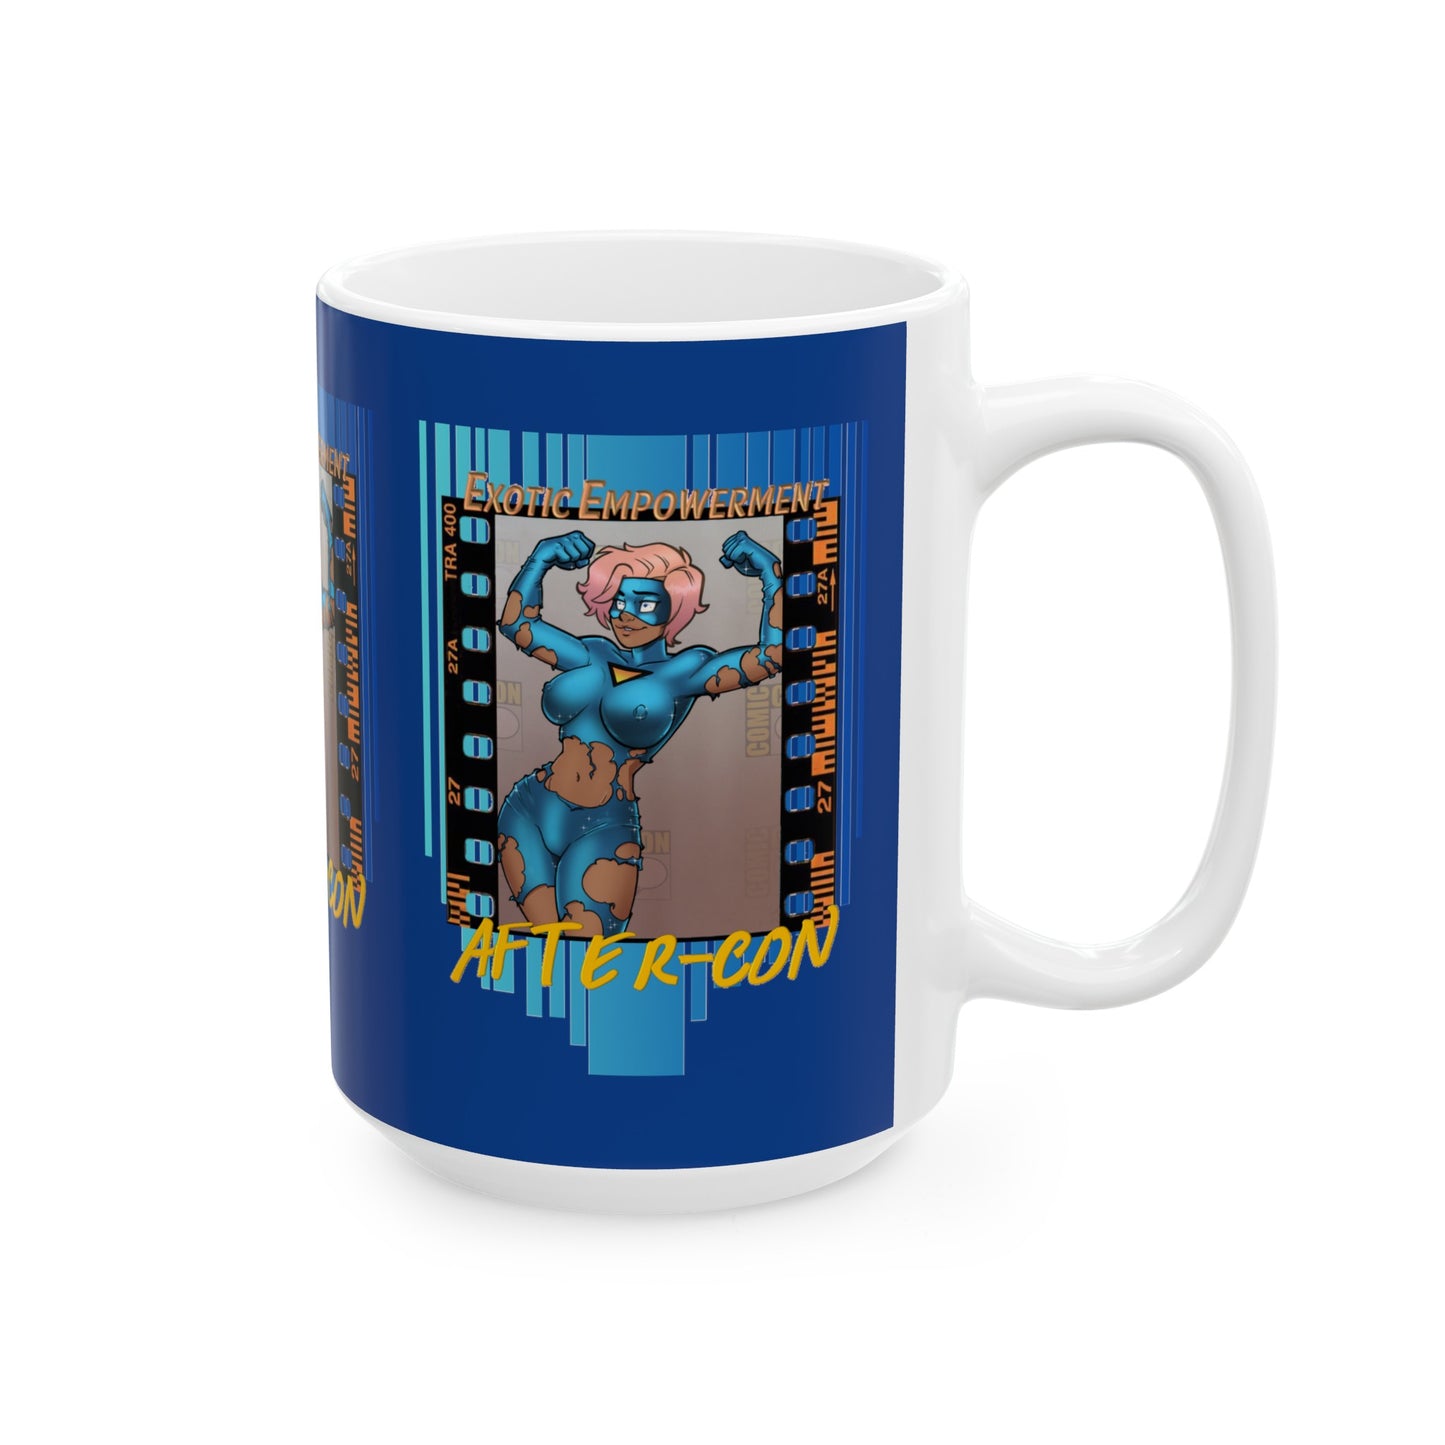 After-Con "Exotic Empowered" Ceramic Mug